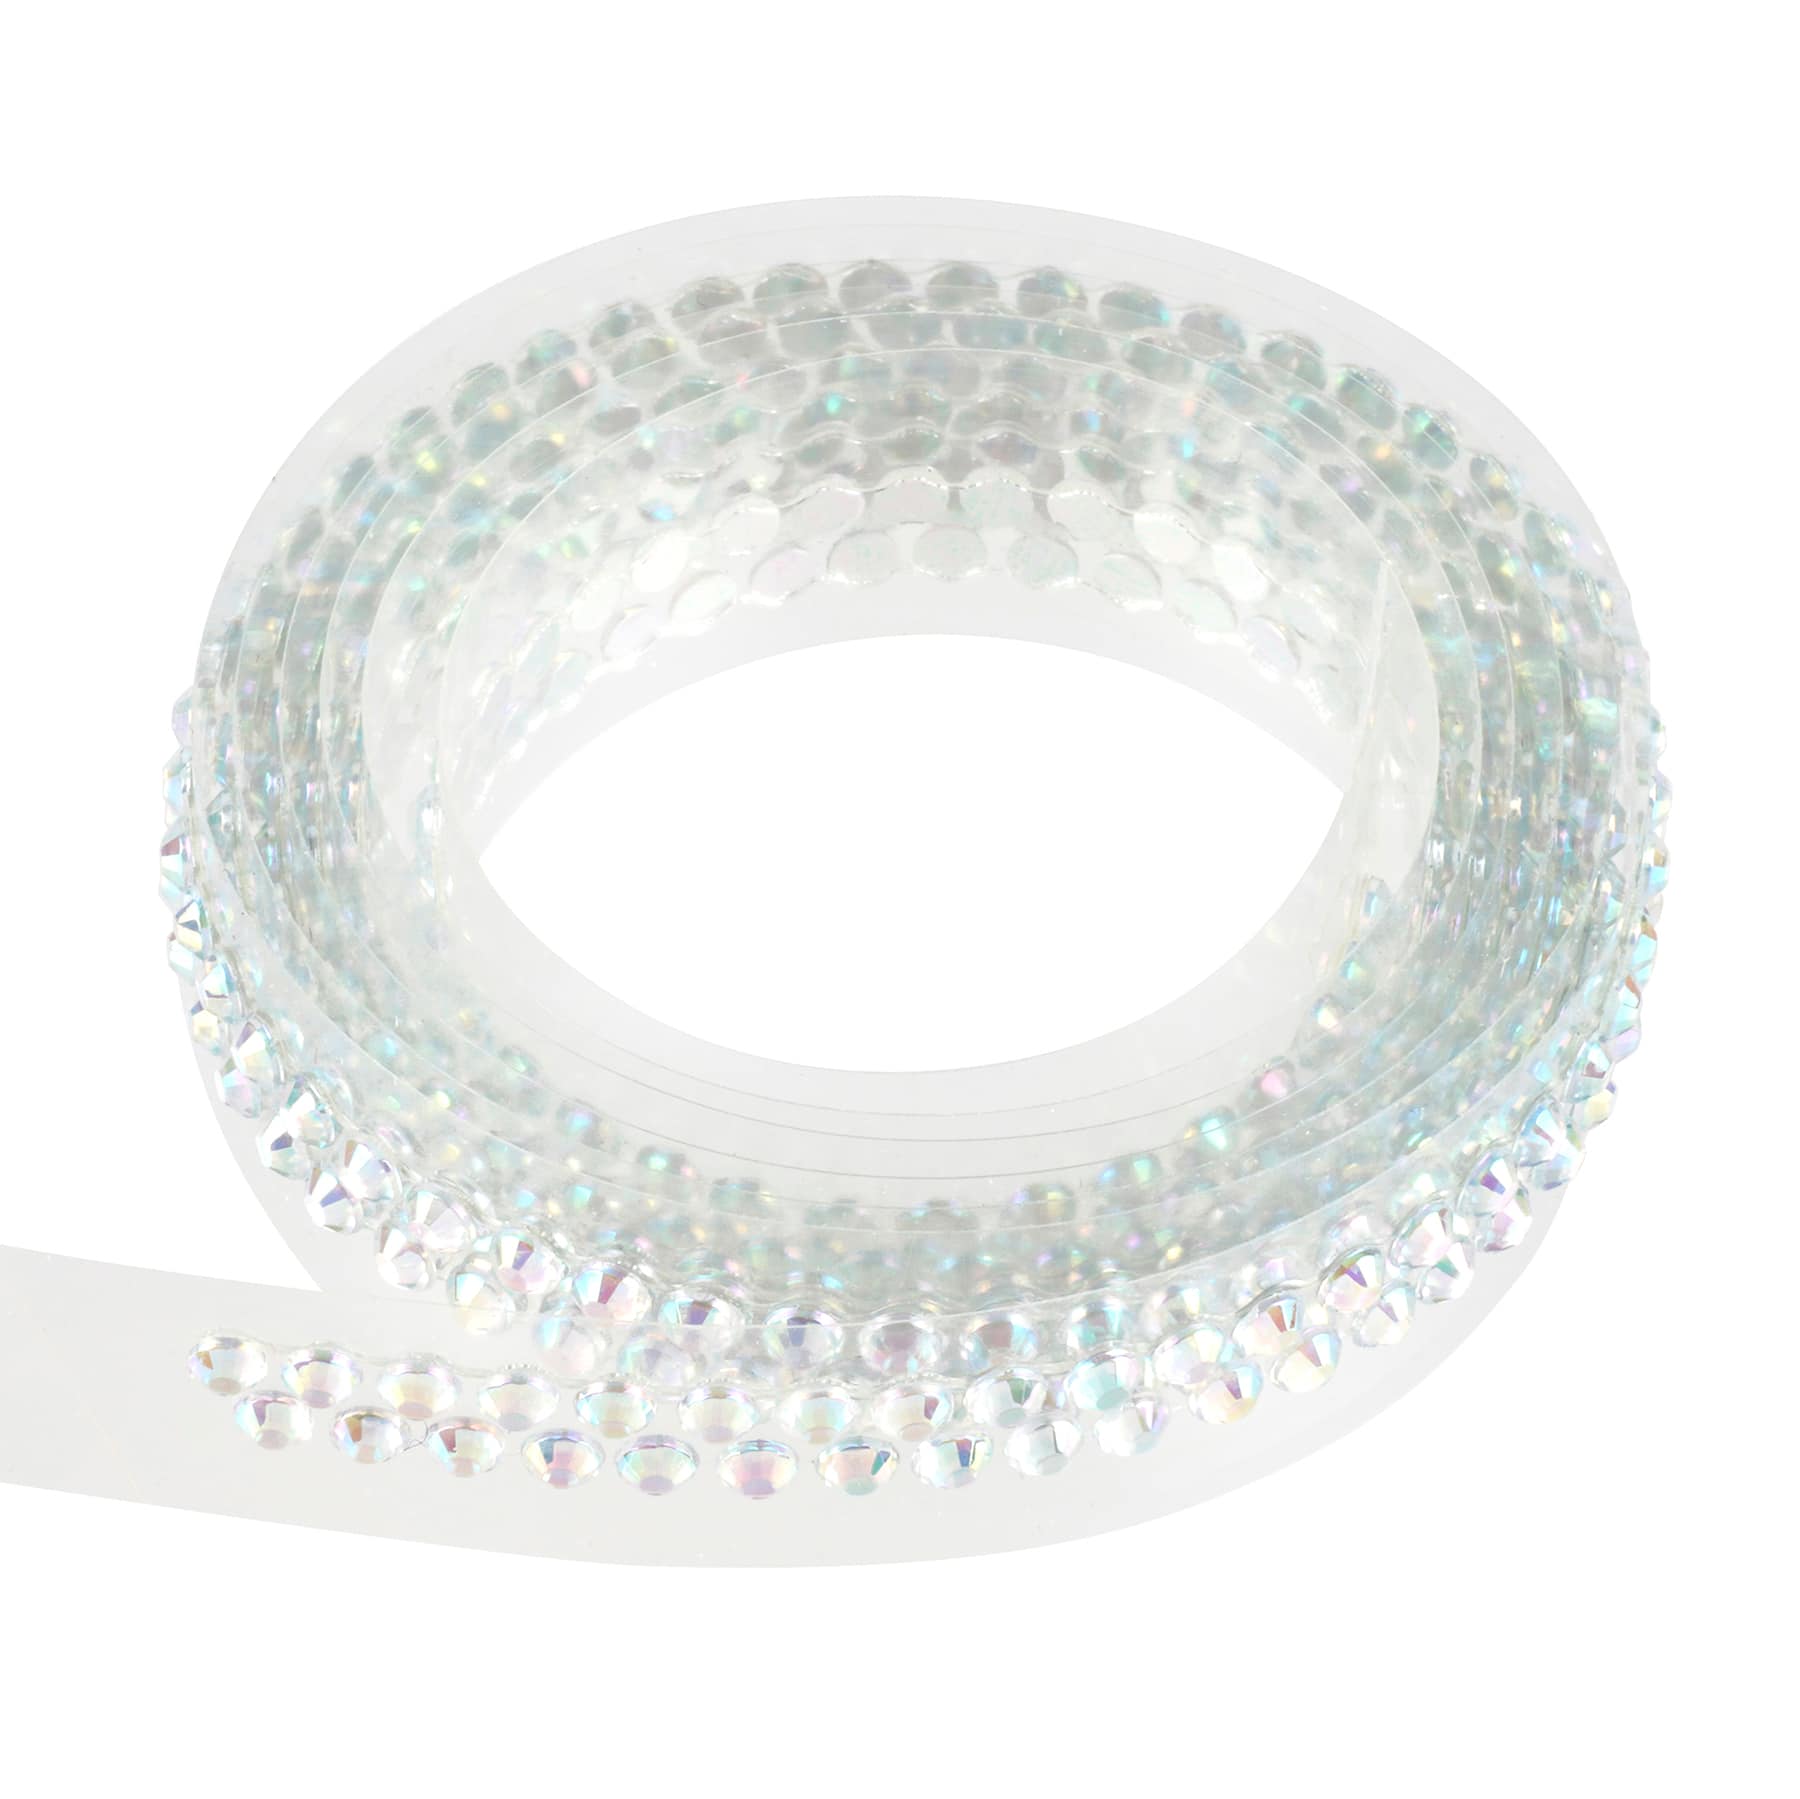 Recollections™ Bling on a Roll™ Iridescent Rhinestones, 3 mm